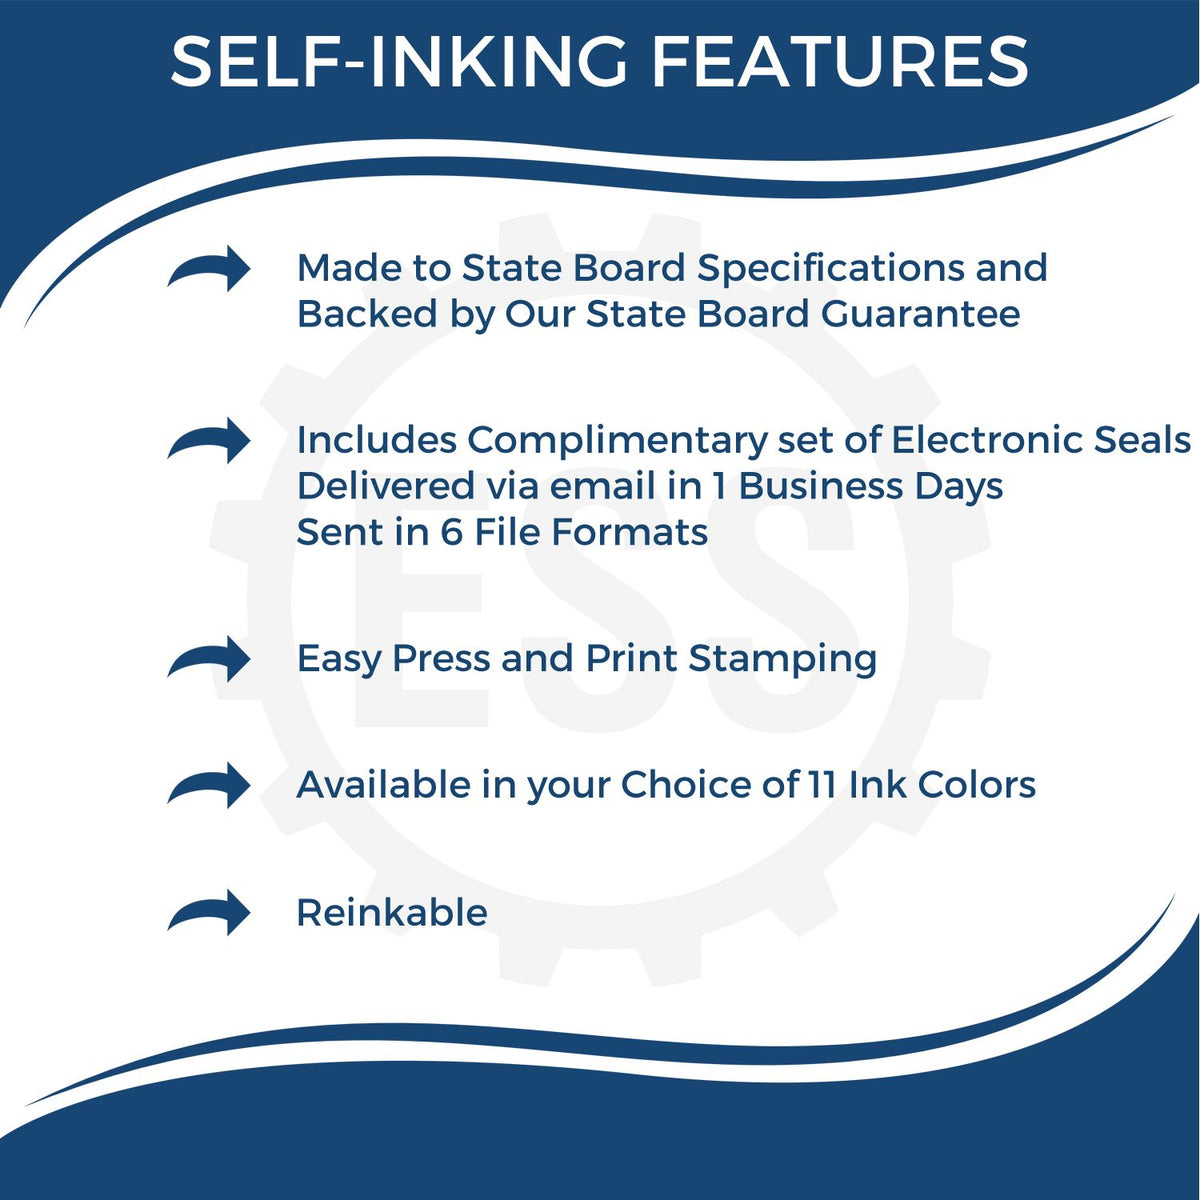 A picture of an infographic highlighting the selling points for the Self-Inking Ohio Landscape Architect Stamp